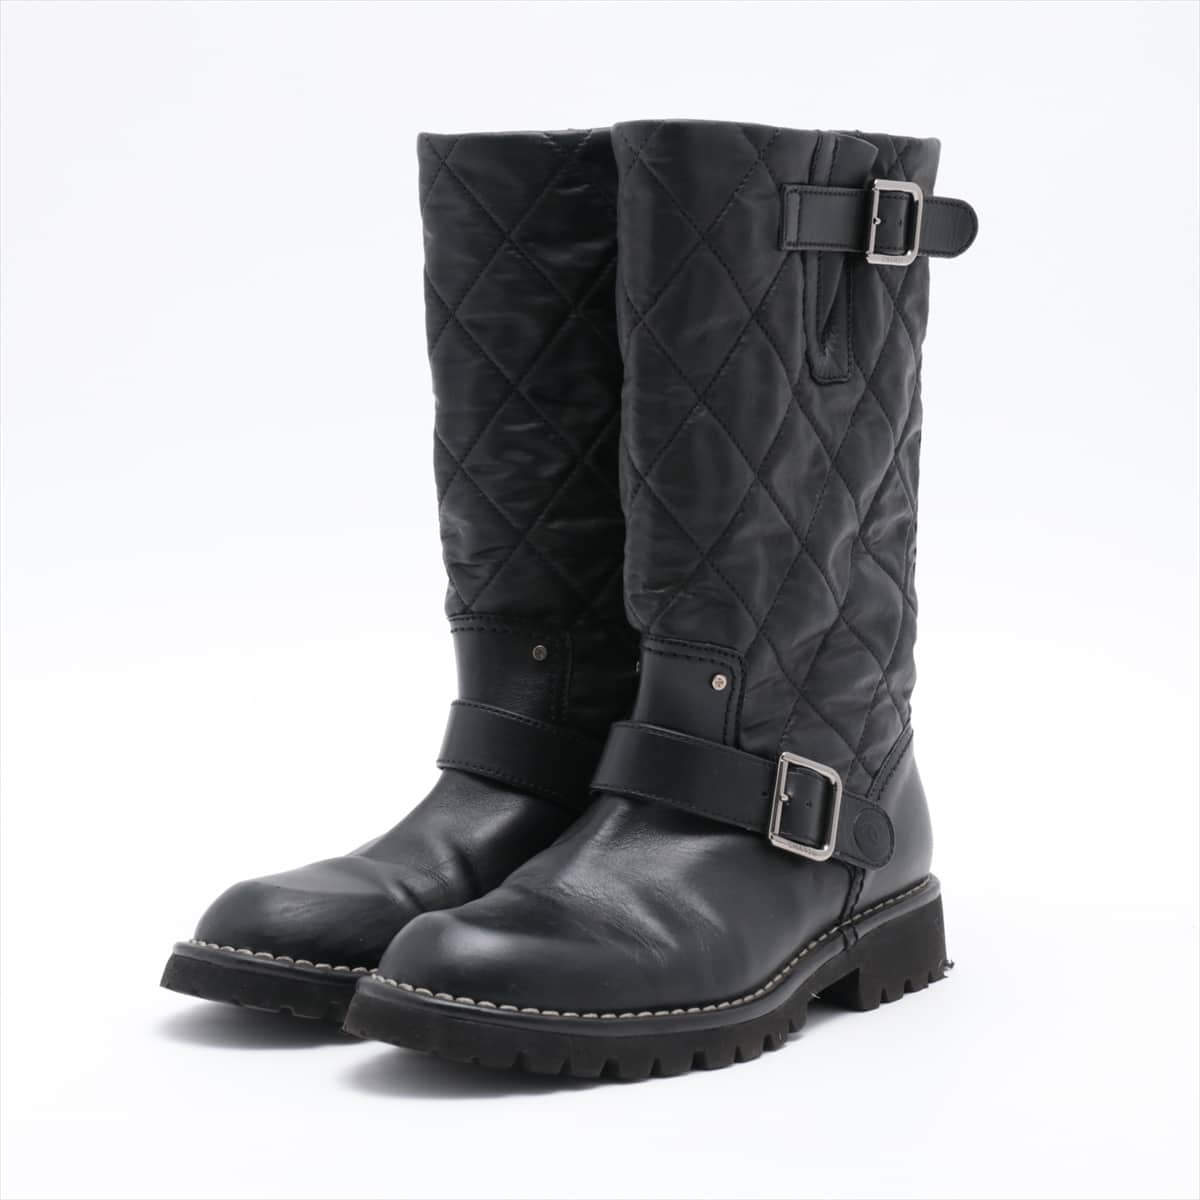 Chanel Coco Mark Matelasse Leather Boots 38 Ladies' Black G26590